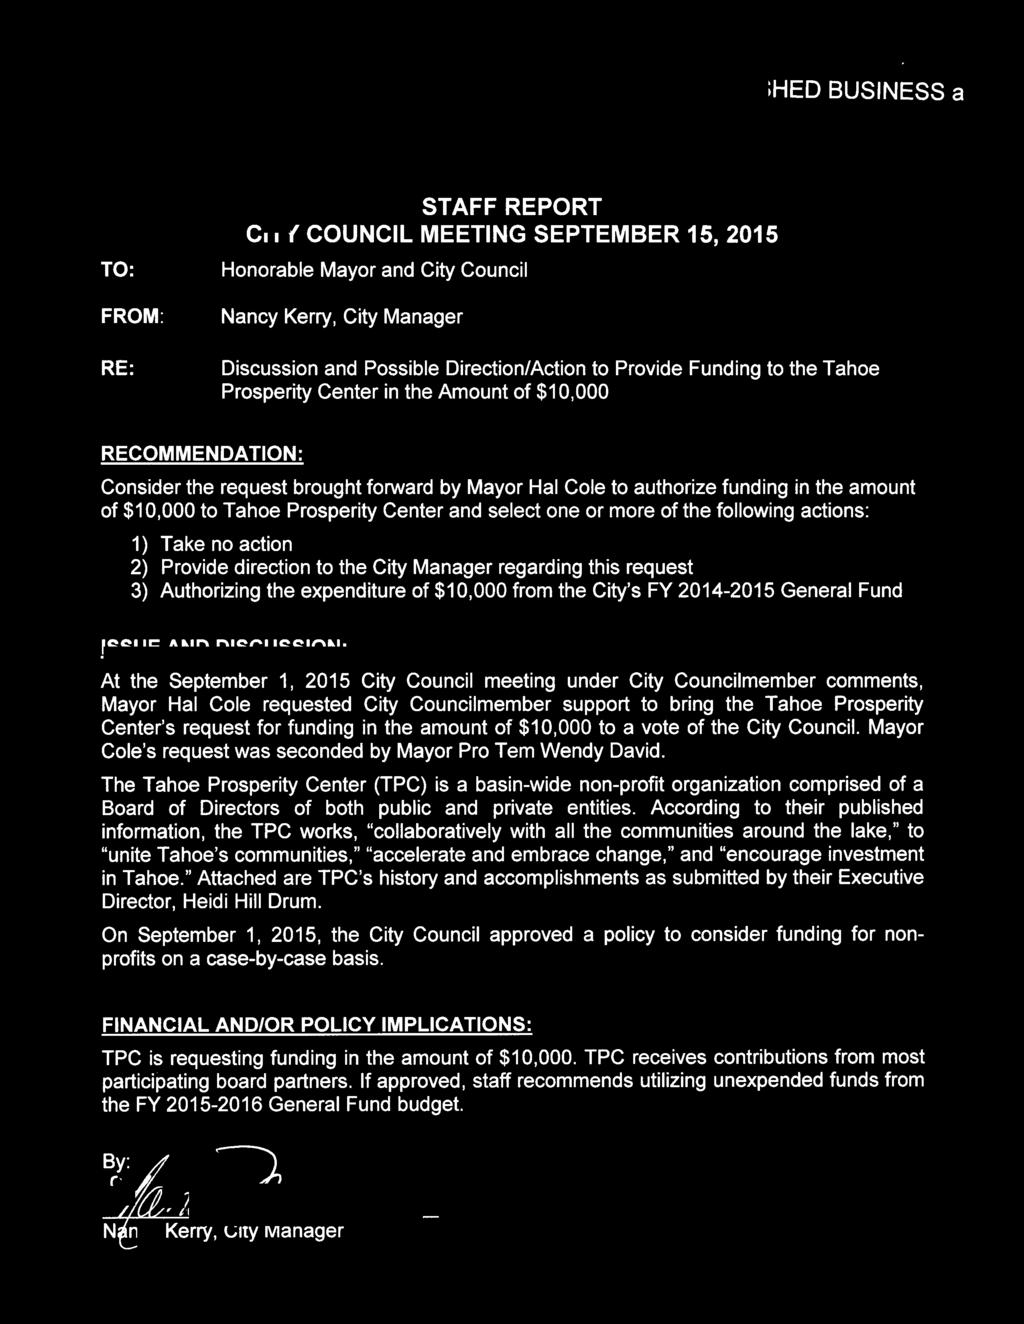 SHED BUSINESS a "making a positive difference now" TO: FROM: RE: STAFF REPORT CITY COUNCIL MEETING SEPTEMBER 15, 2015 Honorable Mayor and City Council Nancy Kerry, City Manager Discussion and